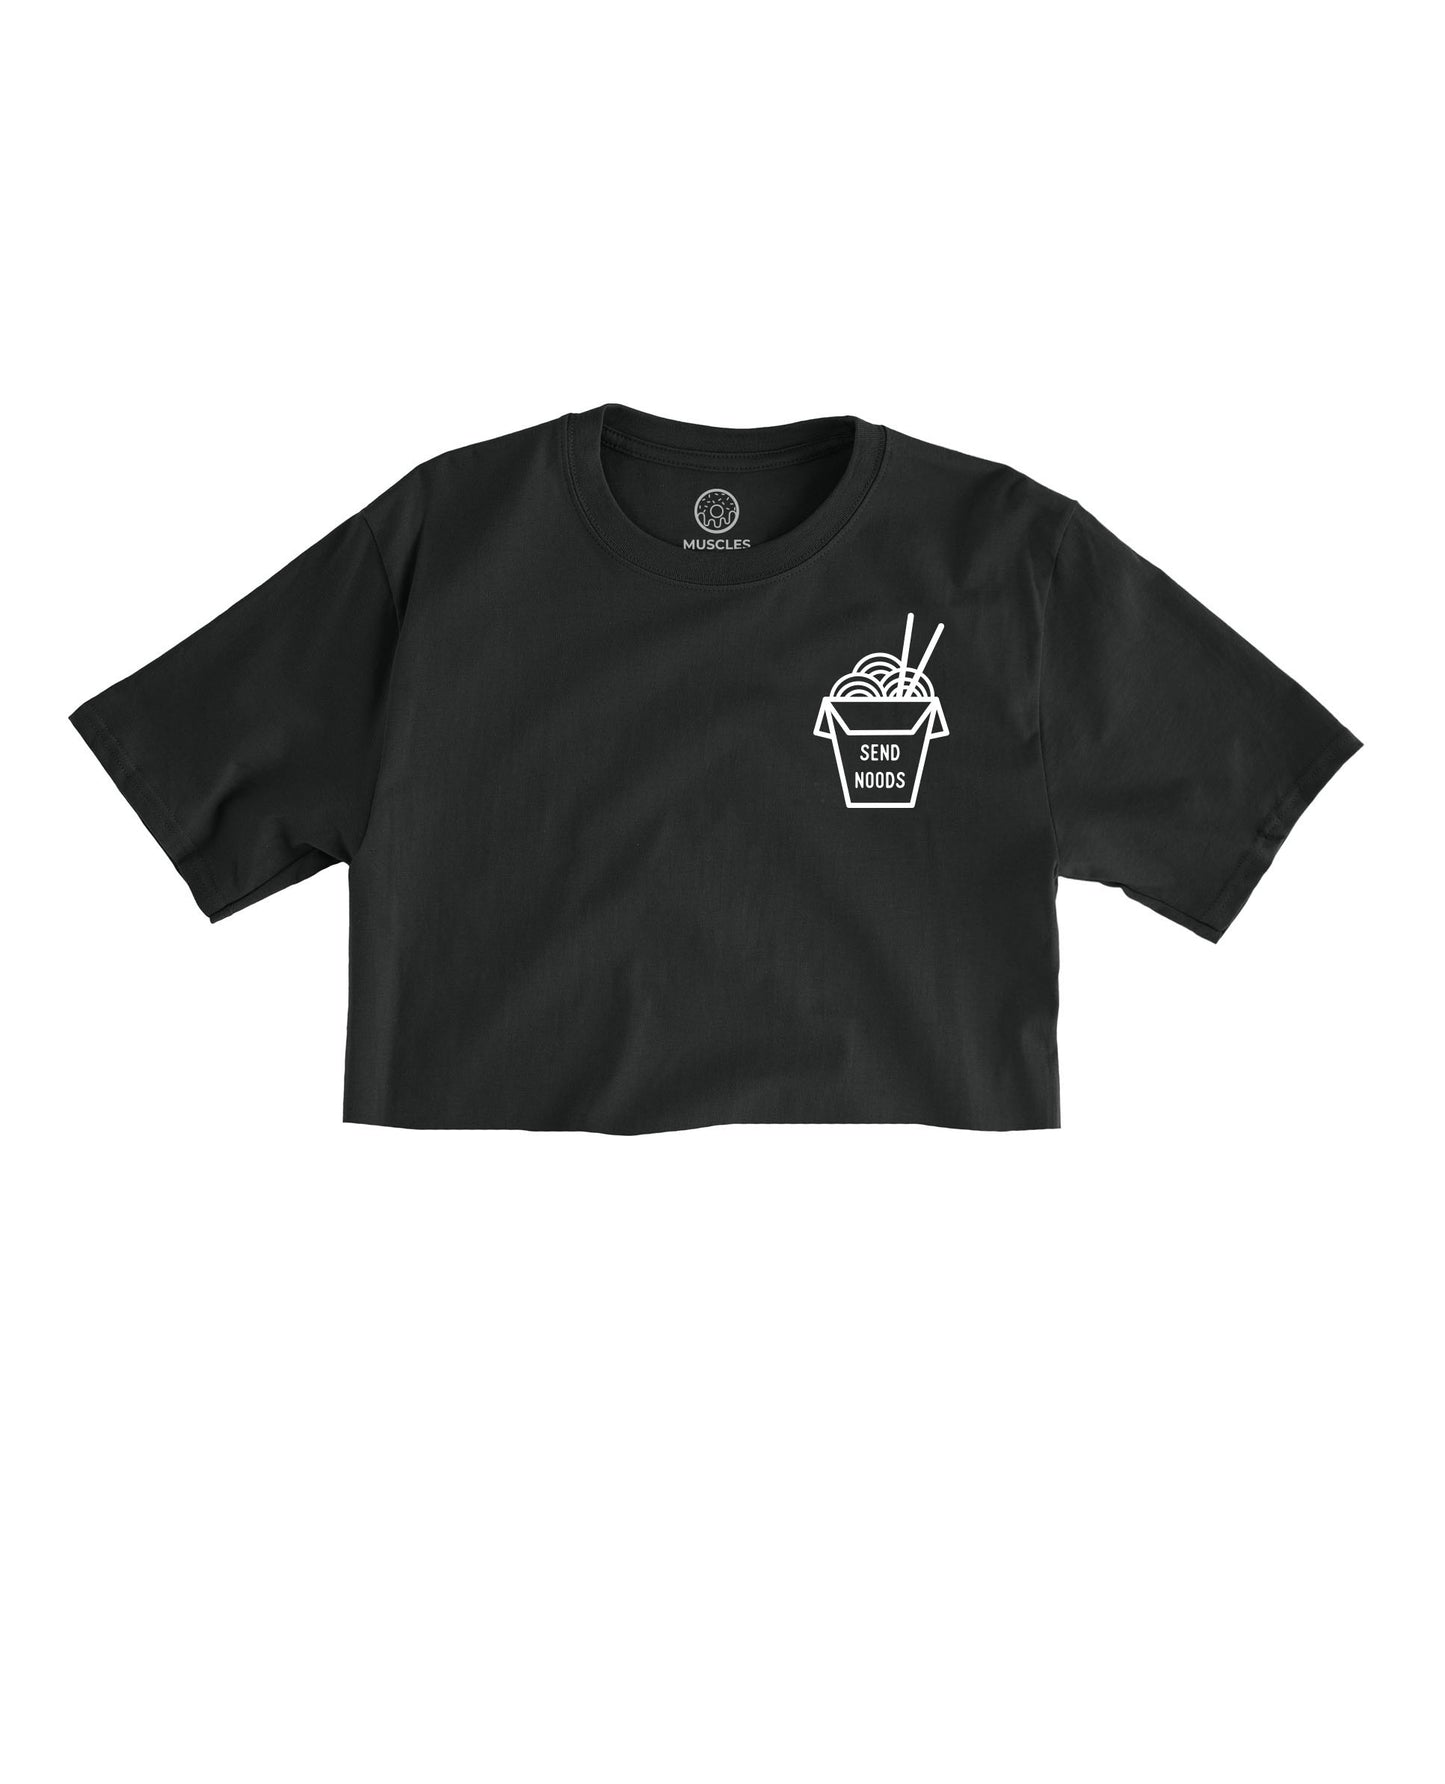 Noods! Logo - Cropped Tee